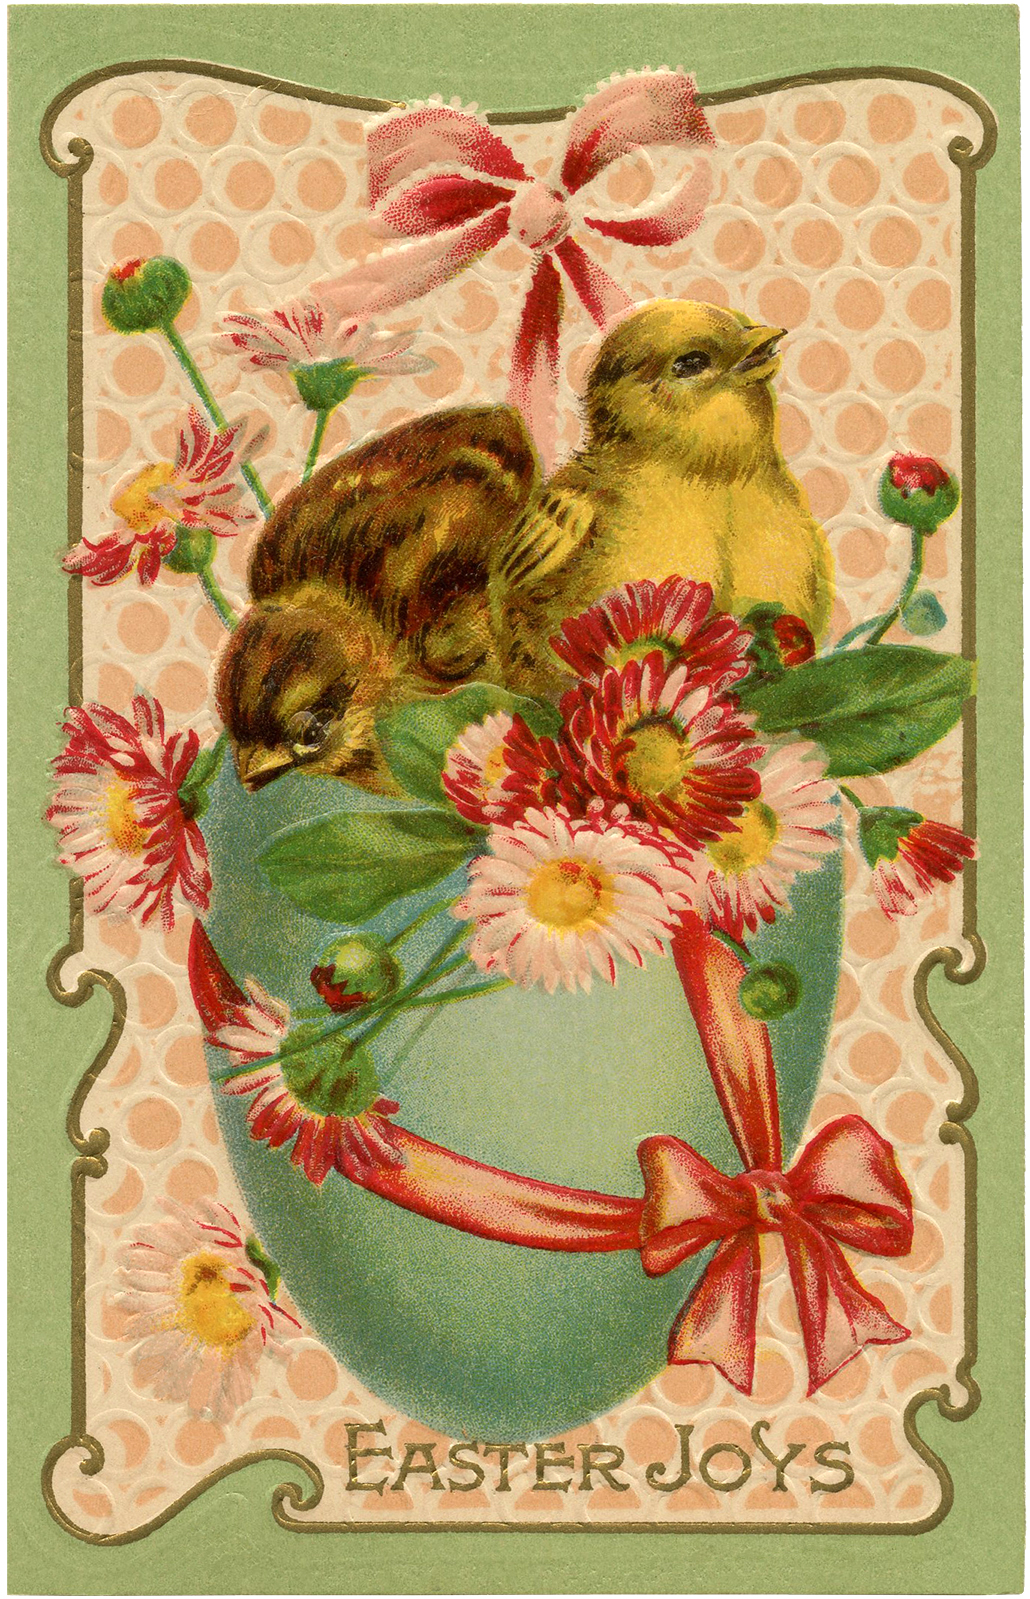 http://thegraphicsfairy.com/wp-content/uploads/2014/04/Stock-Easter-Image-GraphicsFairy.jpg